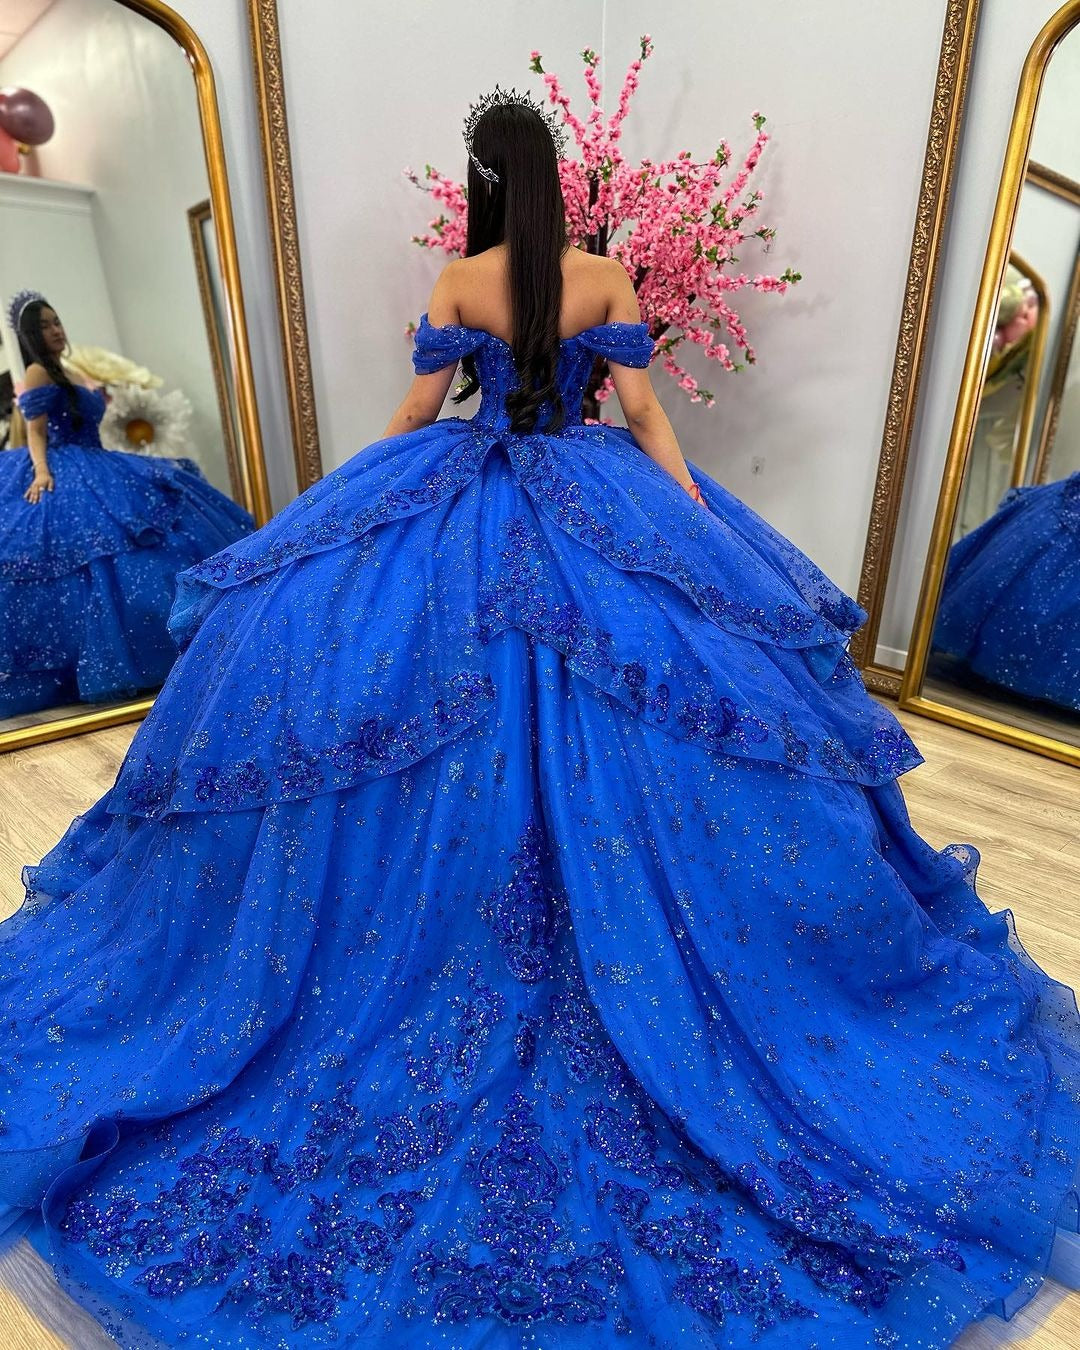 Royal Blue Quinceanera Dresses Off Shoulder Corset Ball Gown Lace Appliques Beaded Corset Tiered Glitter Tulle Ruffles Prom Party Gowns Sweet 16 Dress